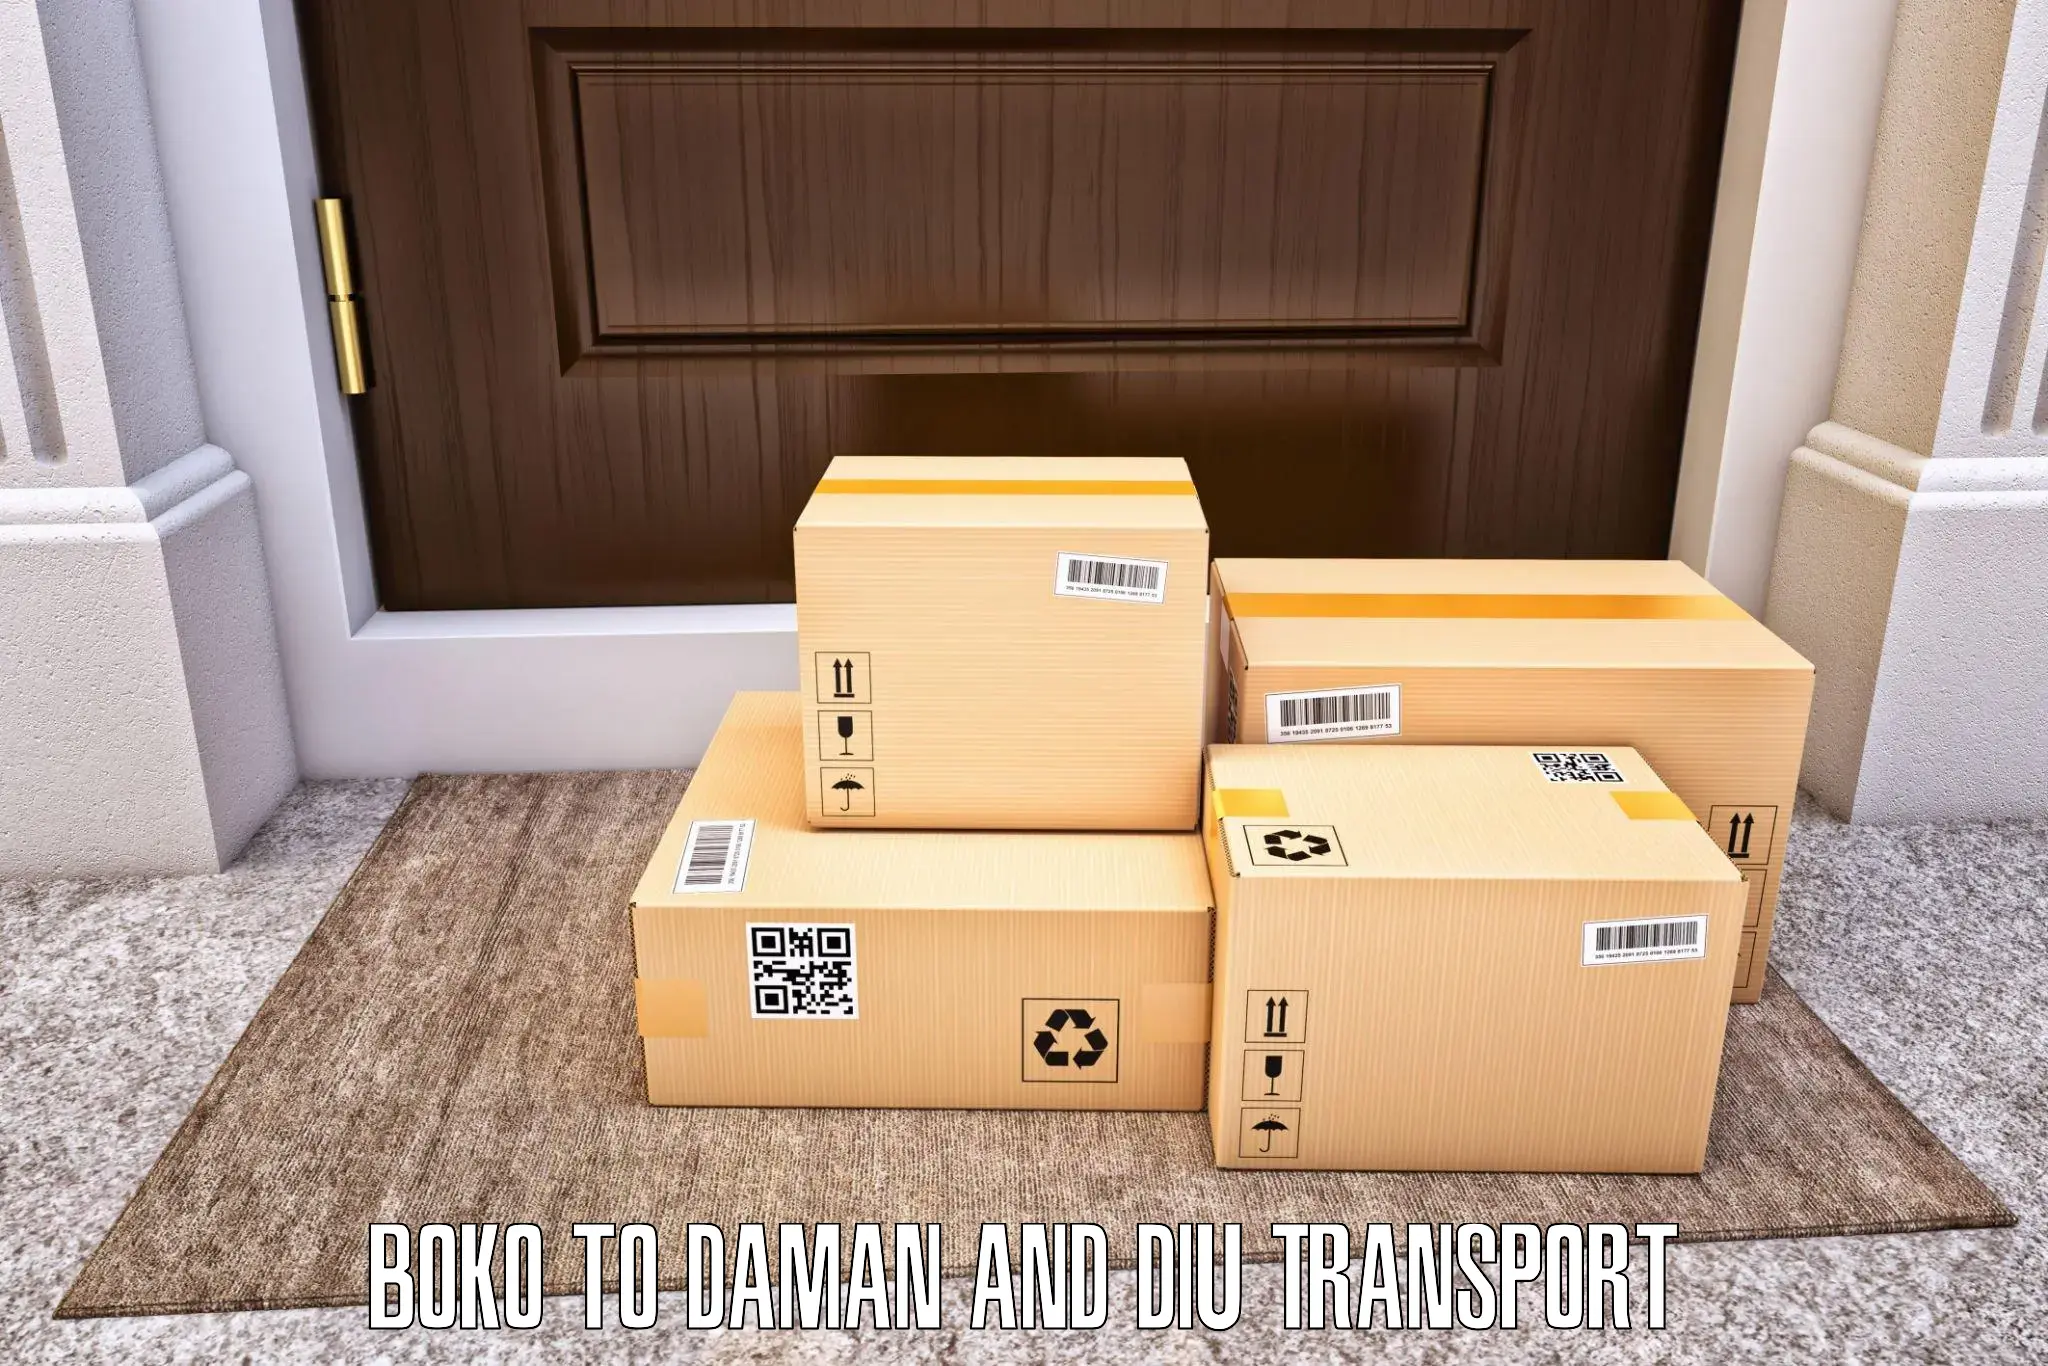 Transport shared services Boko to Daman and Diu